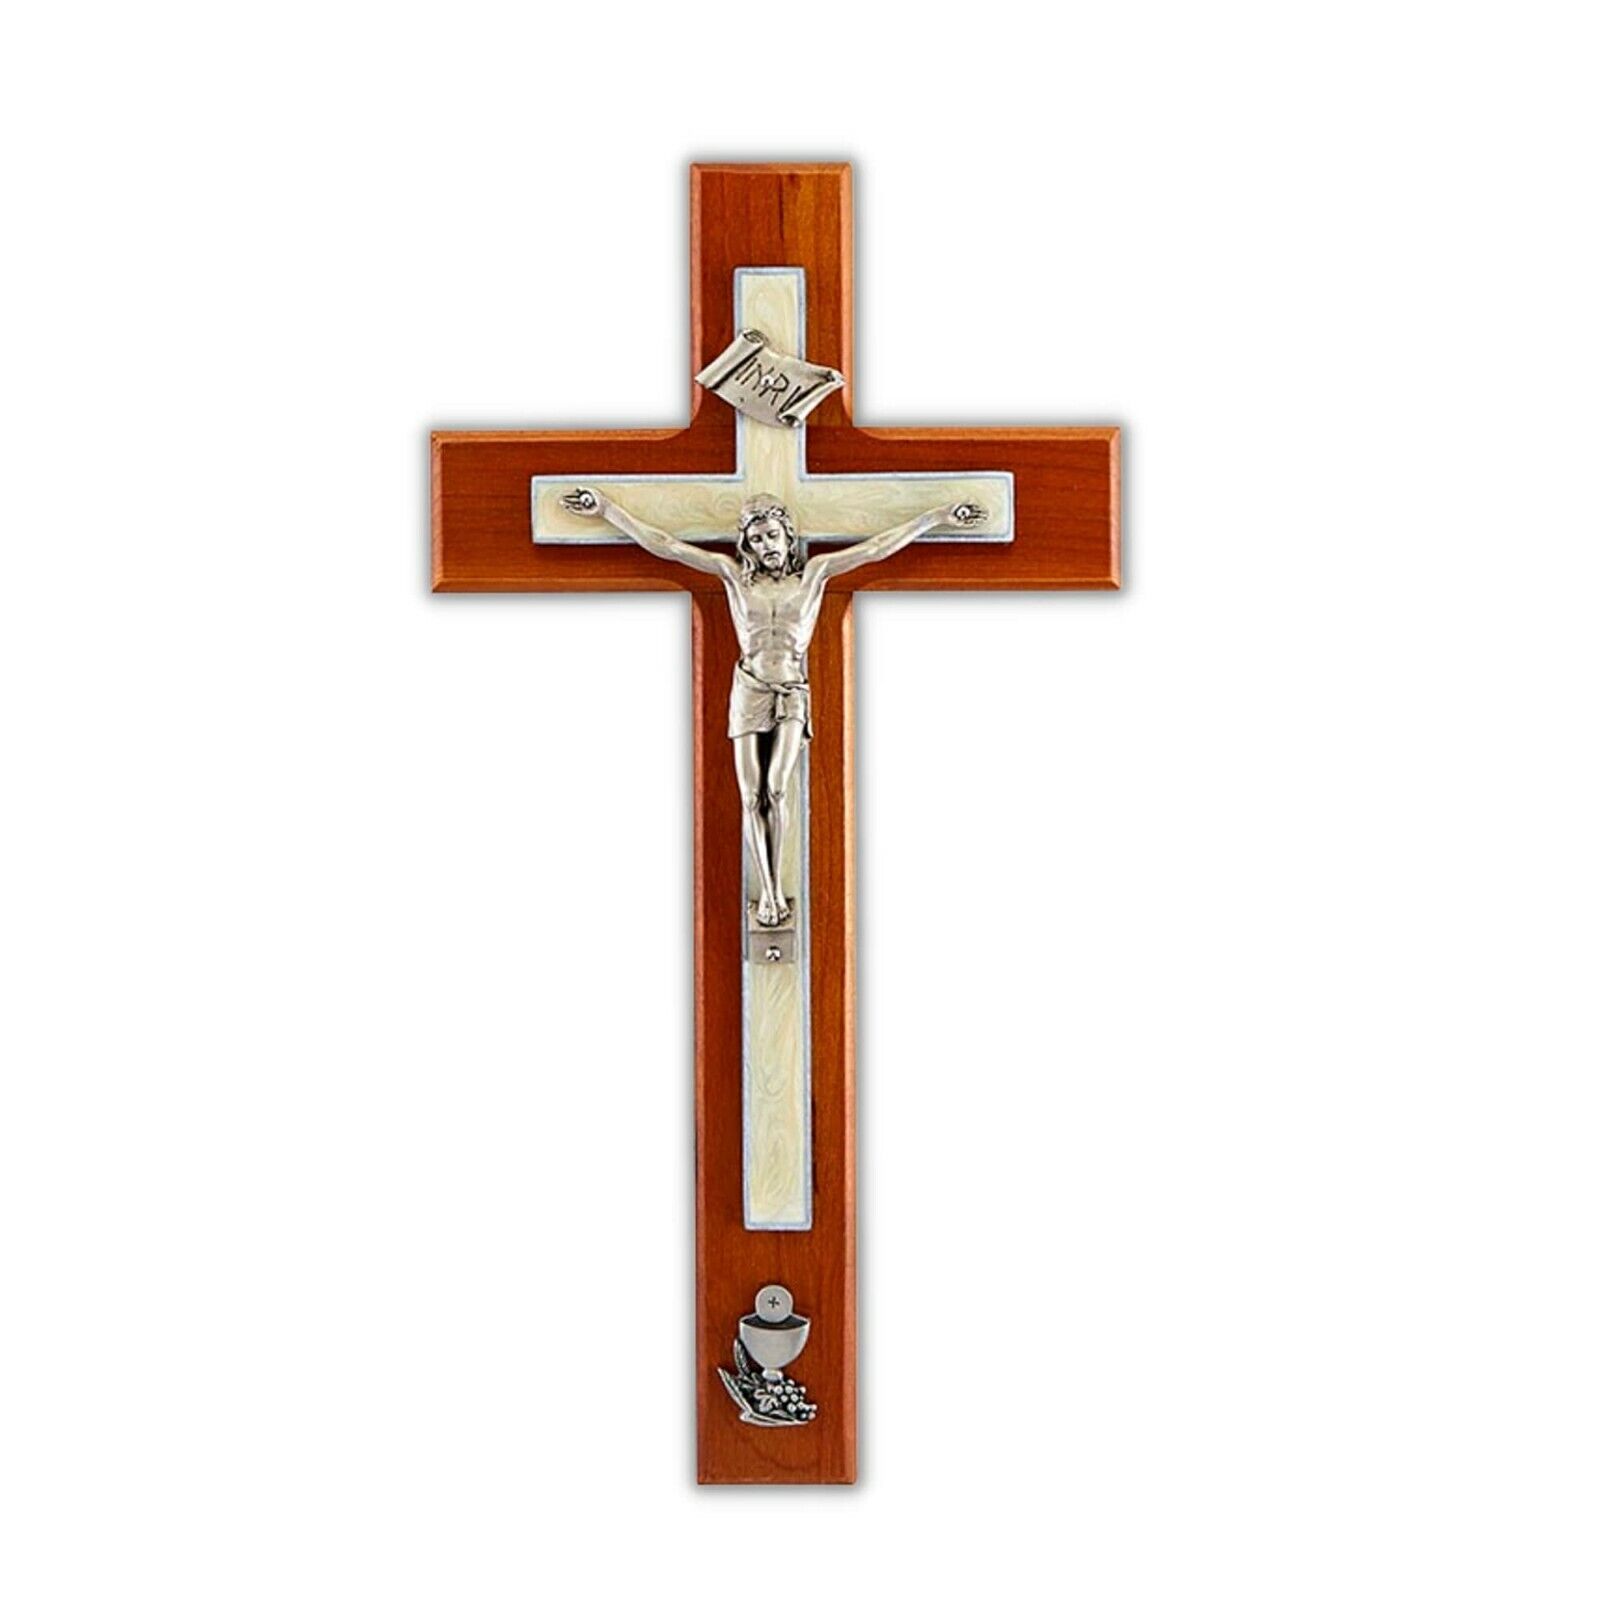 First Communion Religious White Enamel Wooden Hanging Wall Cross Crucifix, 10 In